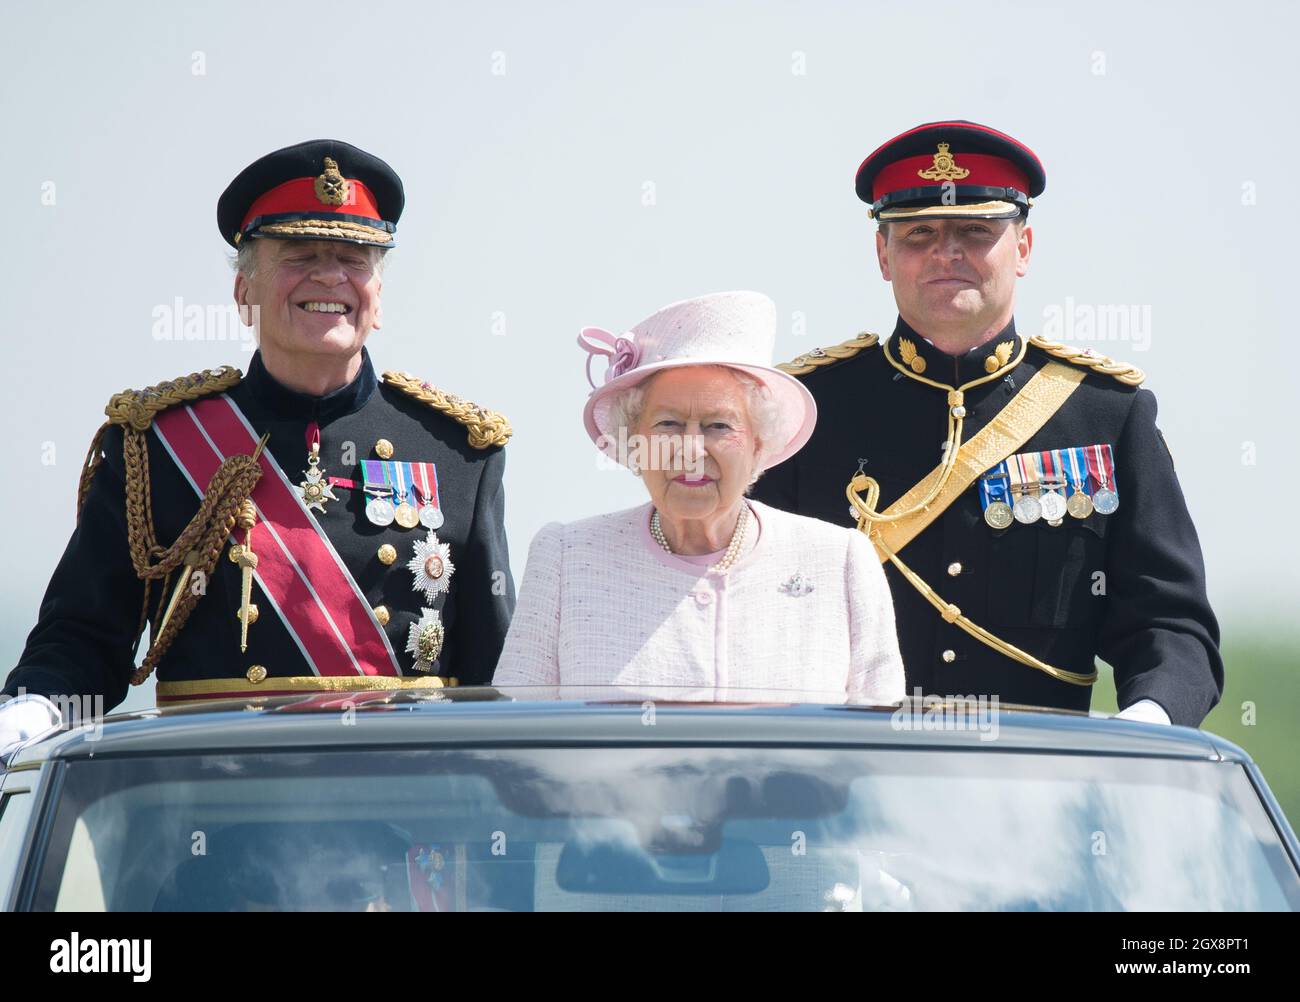 Queen Elizabeth II, Captain-General of The Royal Artillery, overseas a Review of The Royal Artillery from an open-topped Range Rover on the occasion of their Tercentenary at Knighton Down, Larkhill on May 26, 2016. Stock Photo